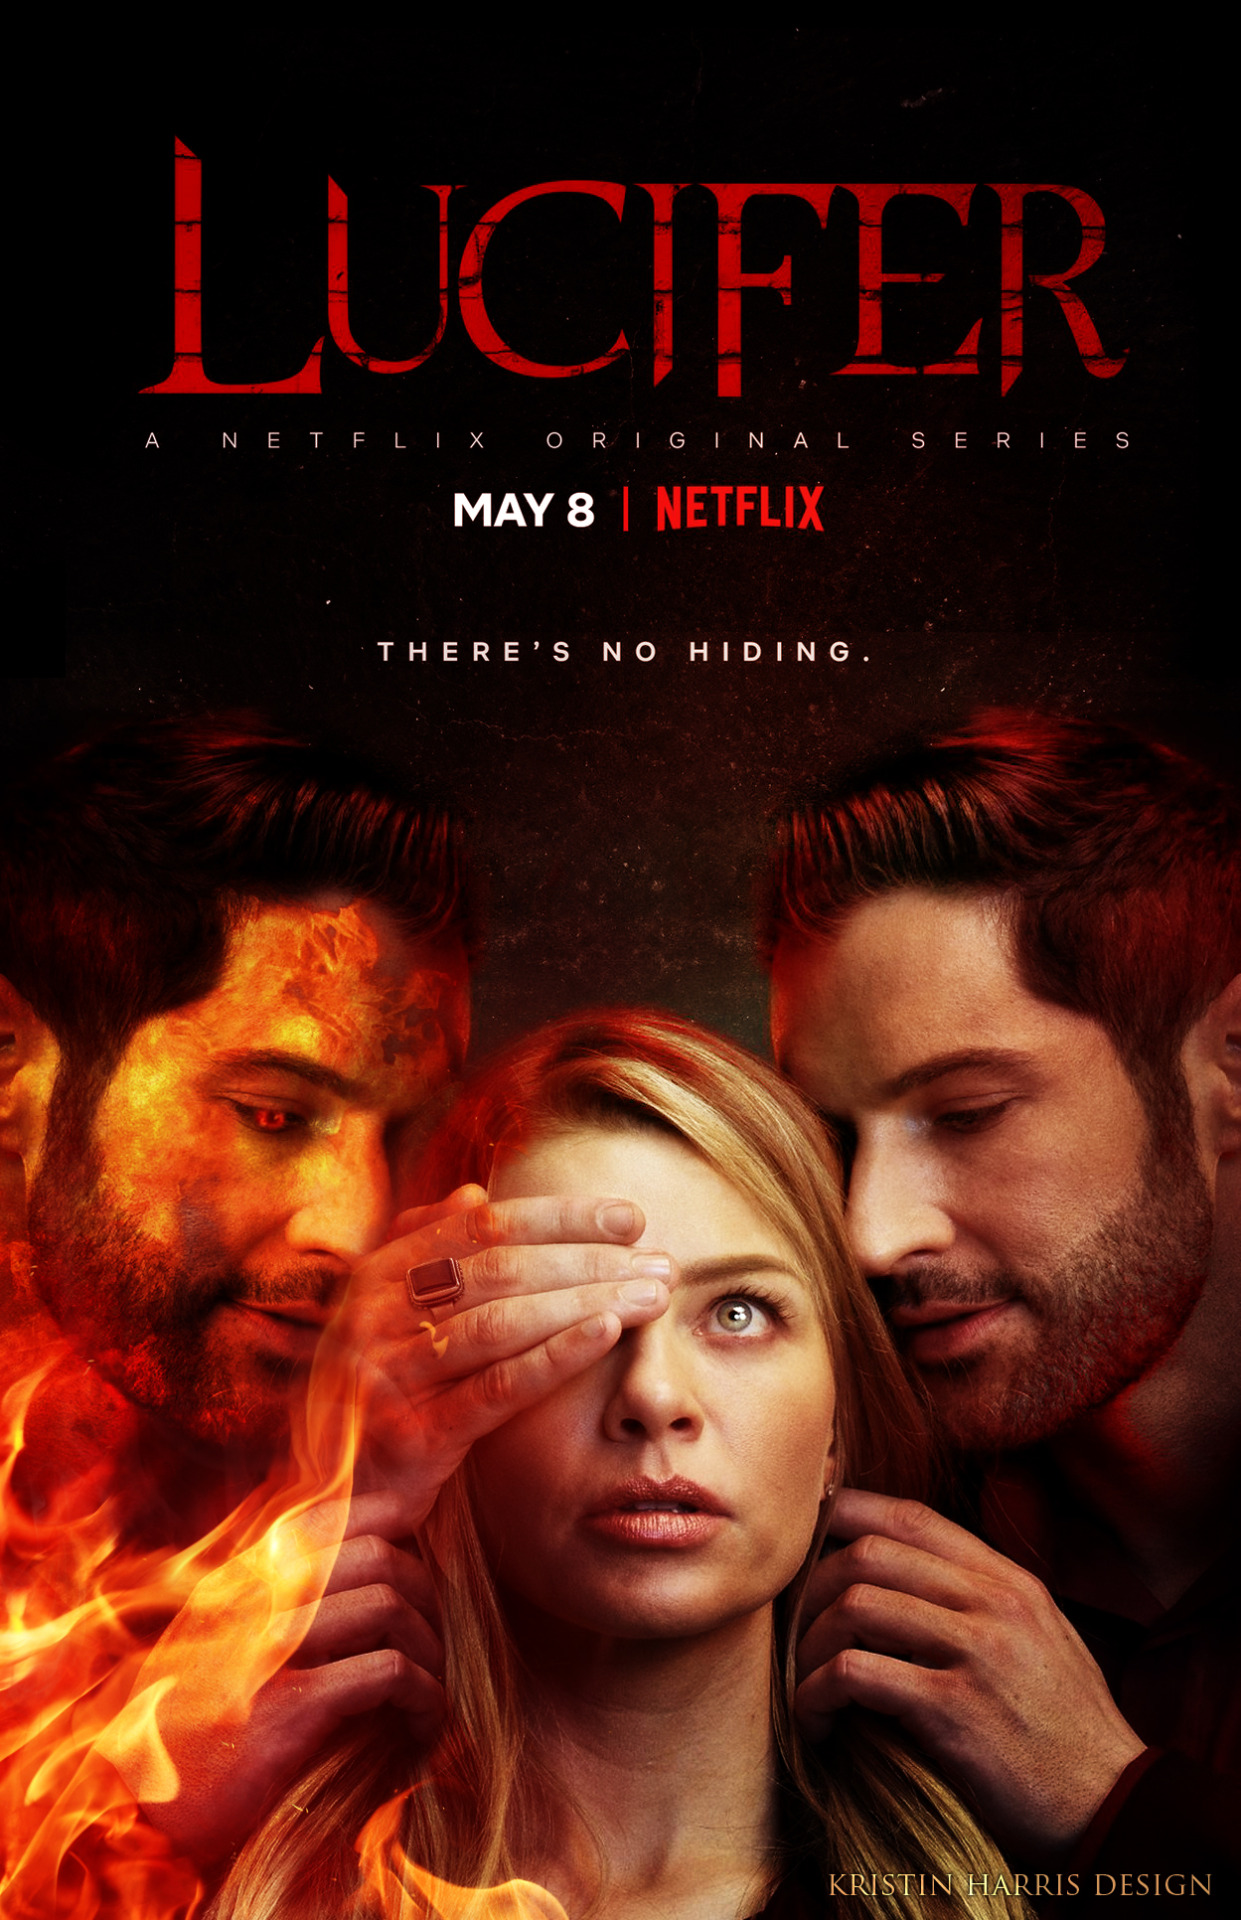 Lucifer S03 2017 Complete Dual Audio Hindienglish Hd 480p720p 